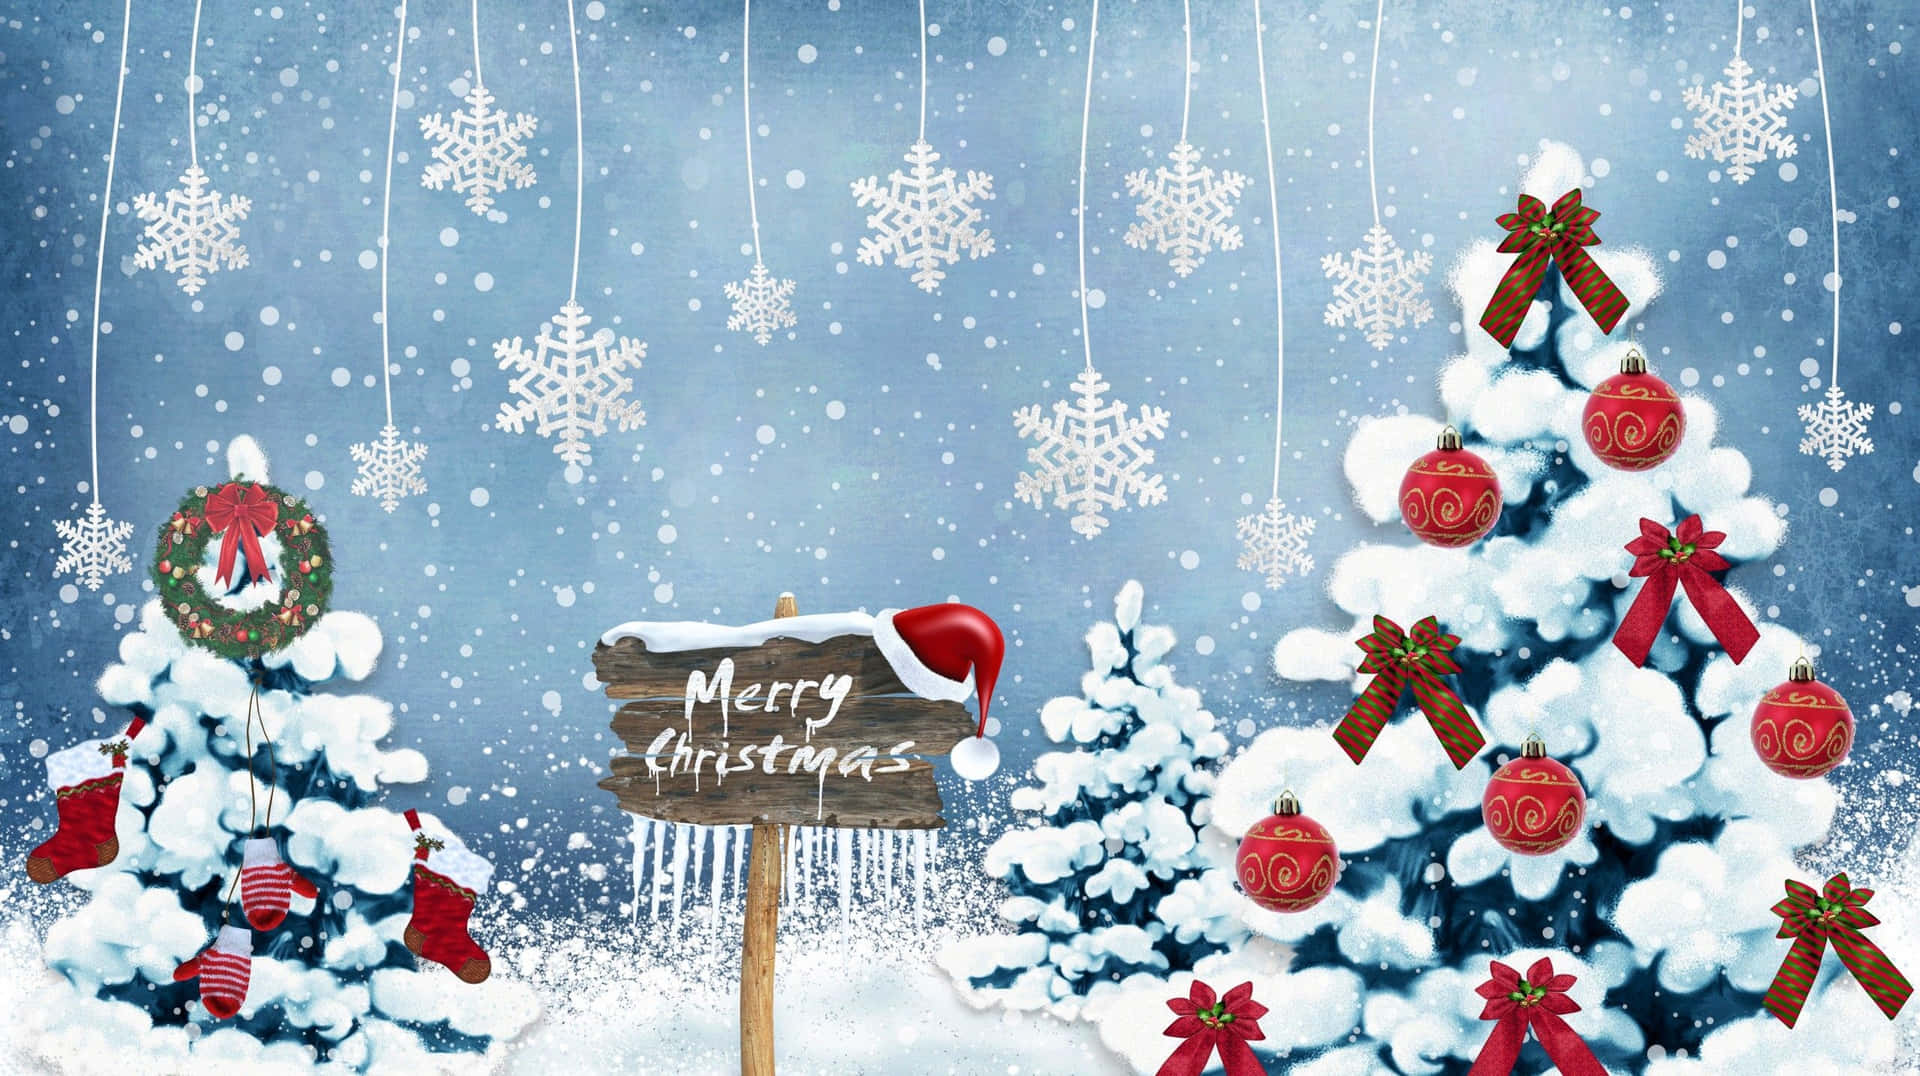 300+] Merry Christmas Backgrounds